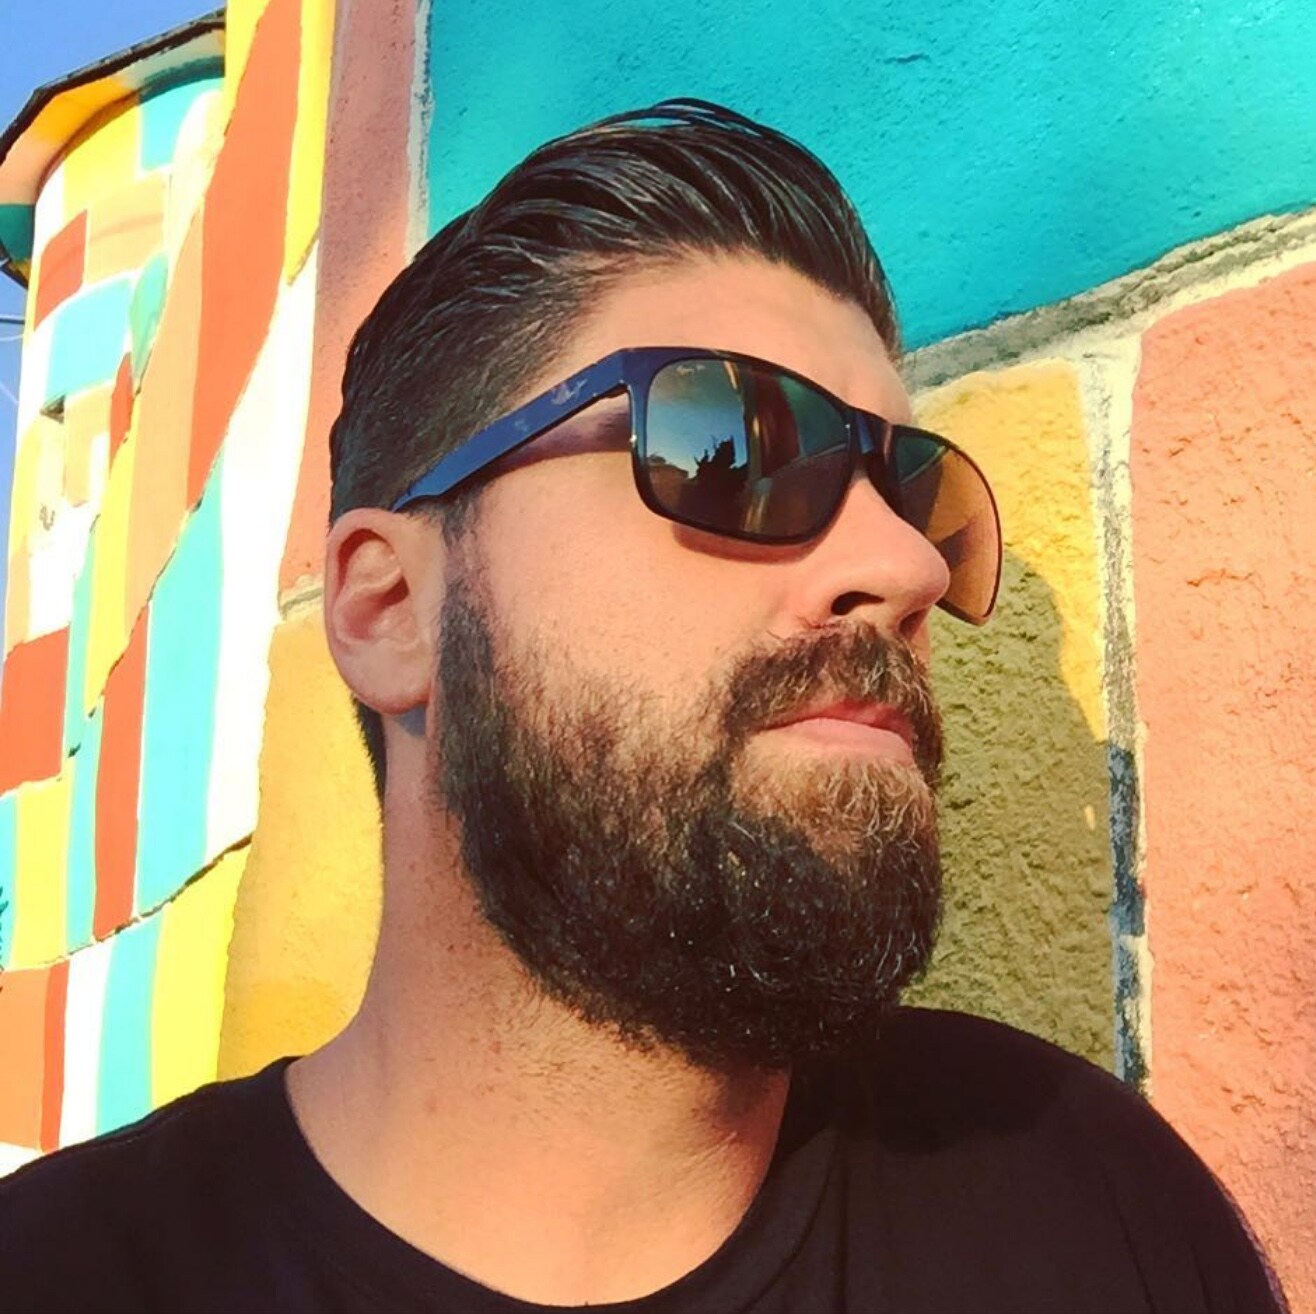 bearded man wearing sunglasses posing in front of a painted mural covered wall